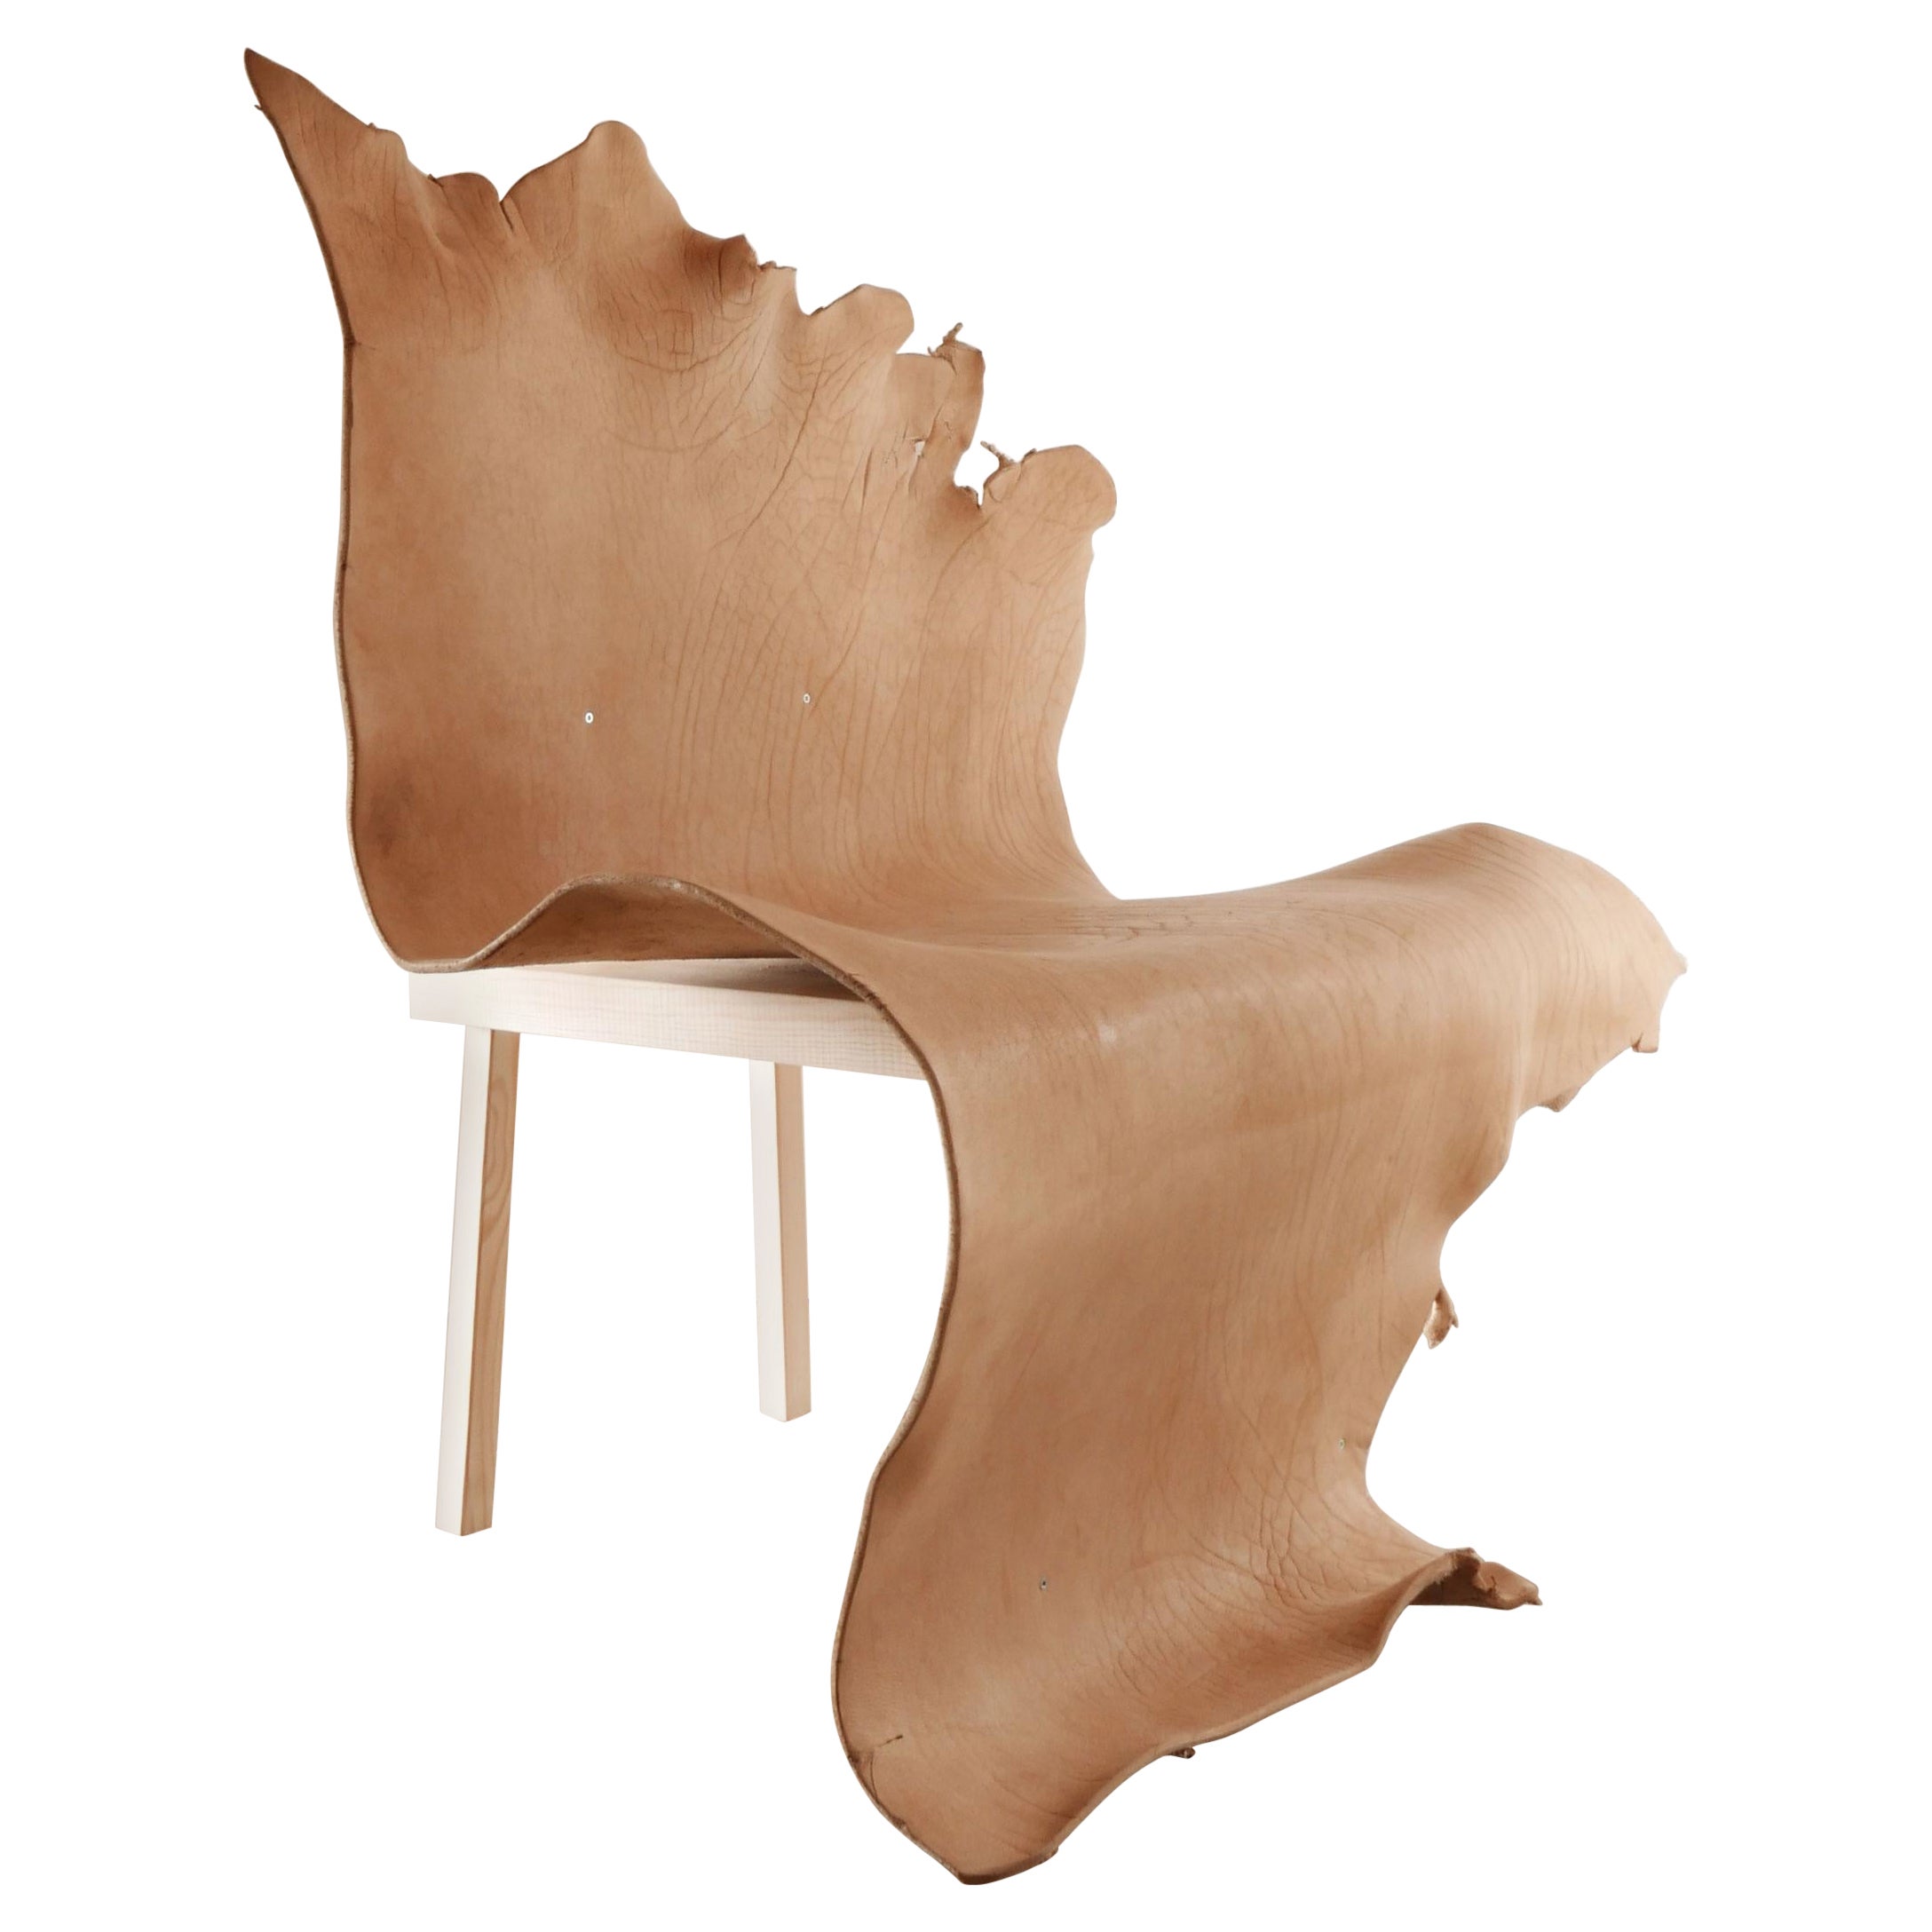 Atribut by Jordi Ribaudí, Buffalo Leather Sculptural Furniture For Sale